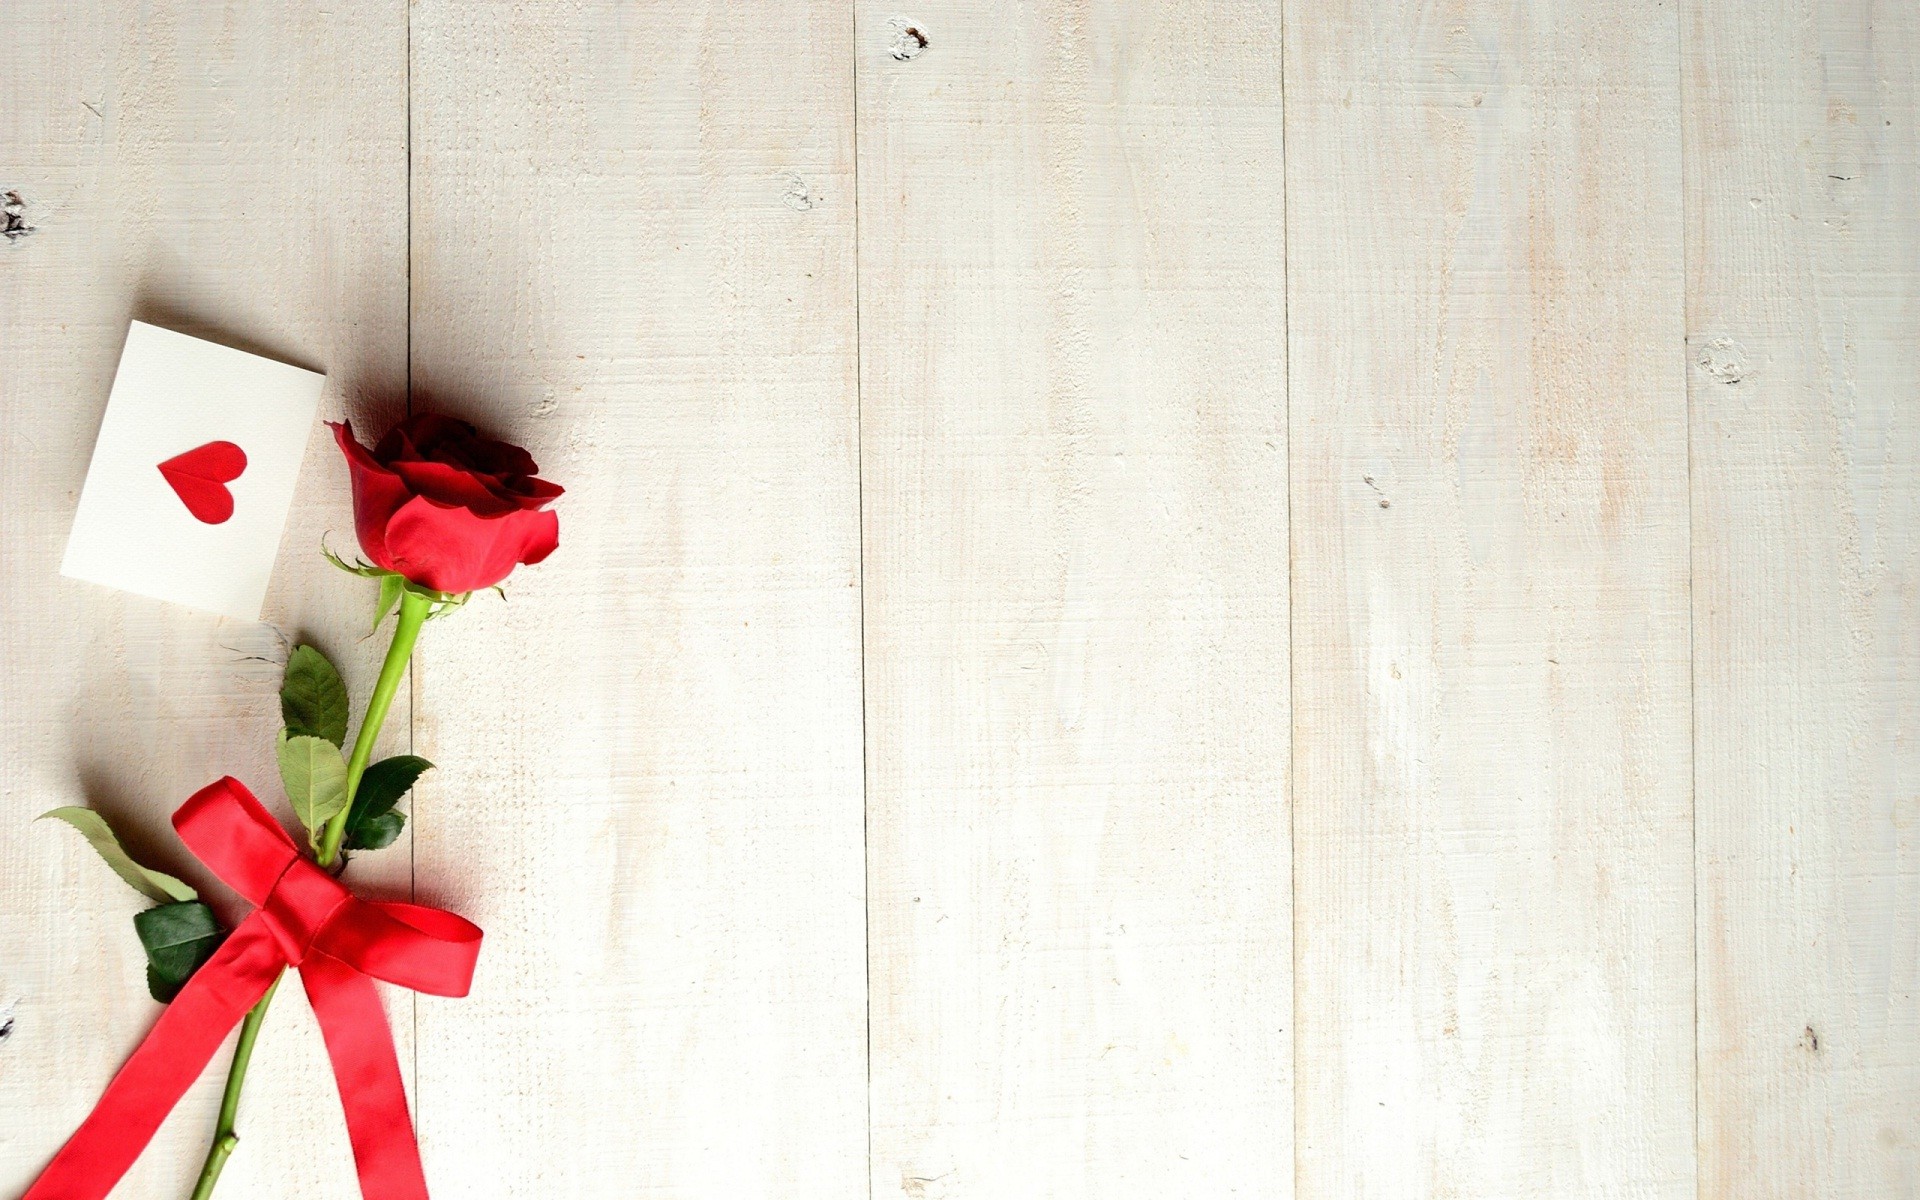 1920x1200 Love letter and red rose image | HD Wallpapers Rocks